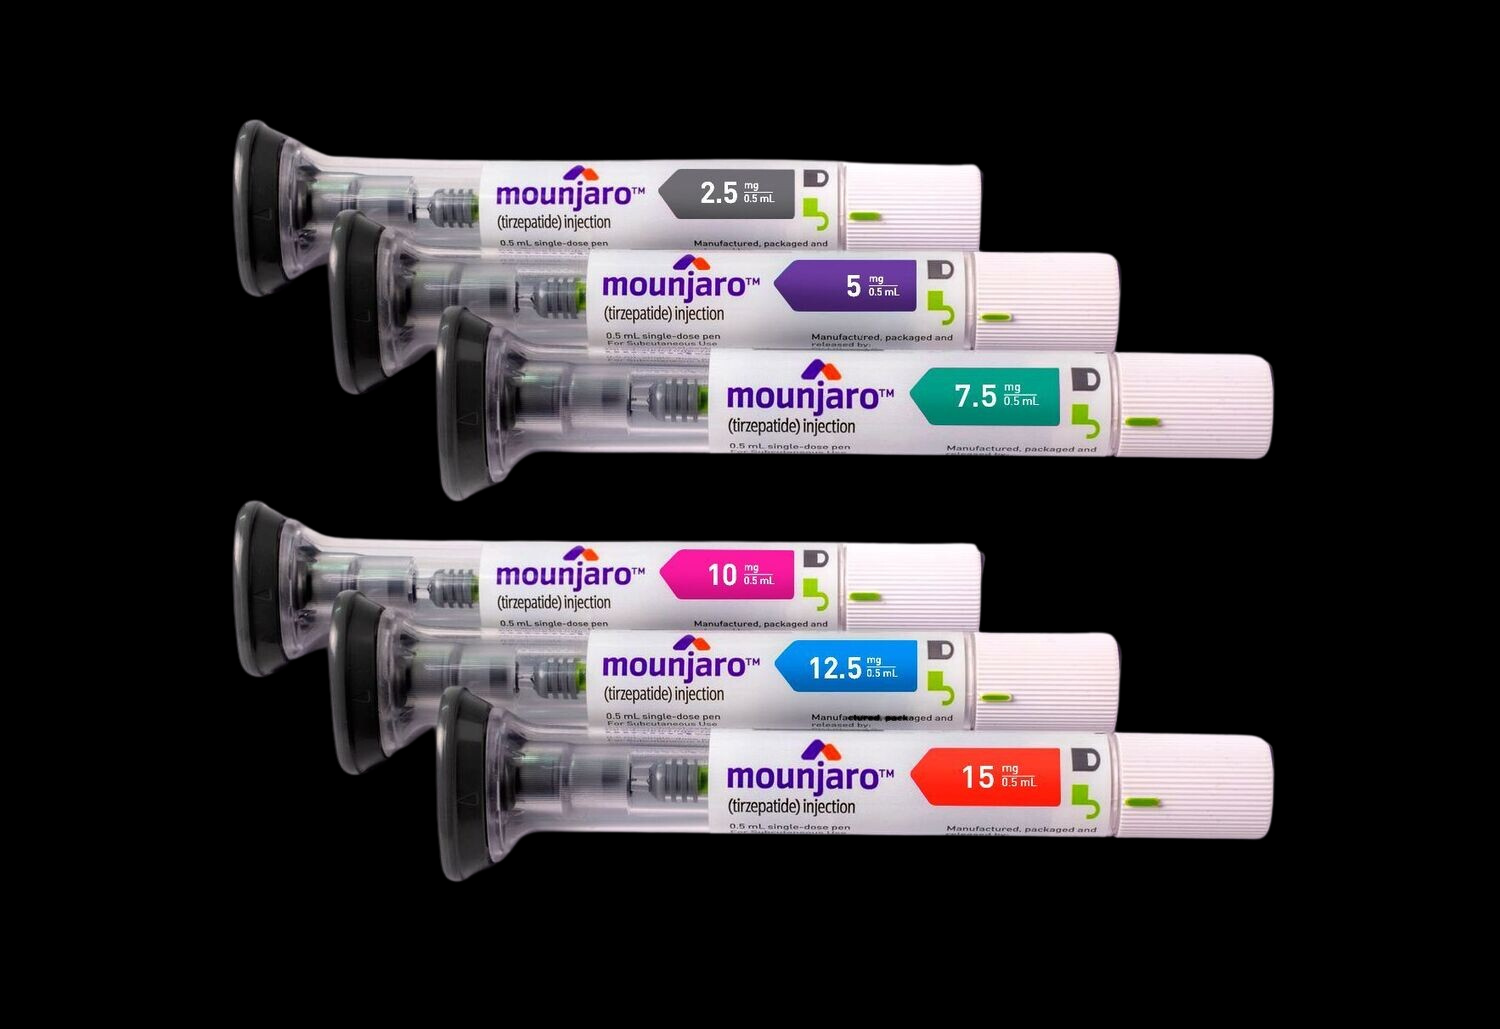 A collection of Mounjaro KwikPens in ascending dosages from 2.5mg to 15mg, designed for weekly self-injection to aid in weight loss by regulating blood sugar and energy balance."